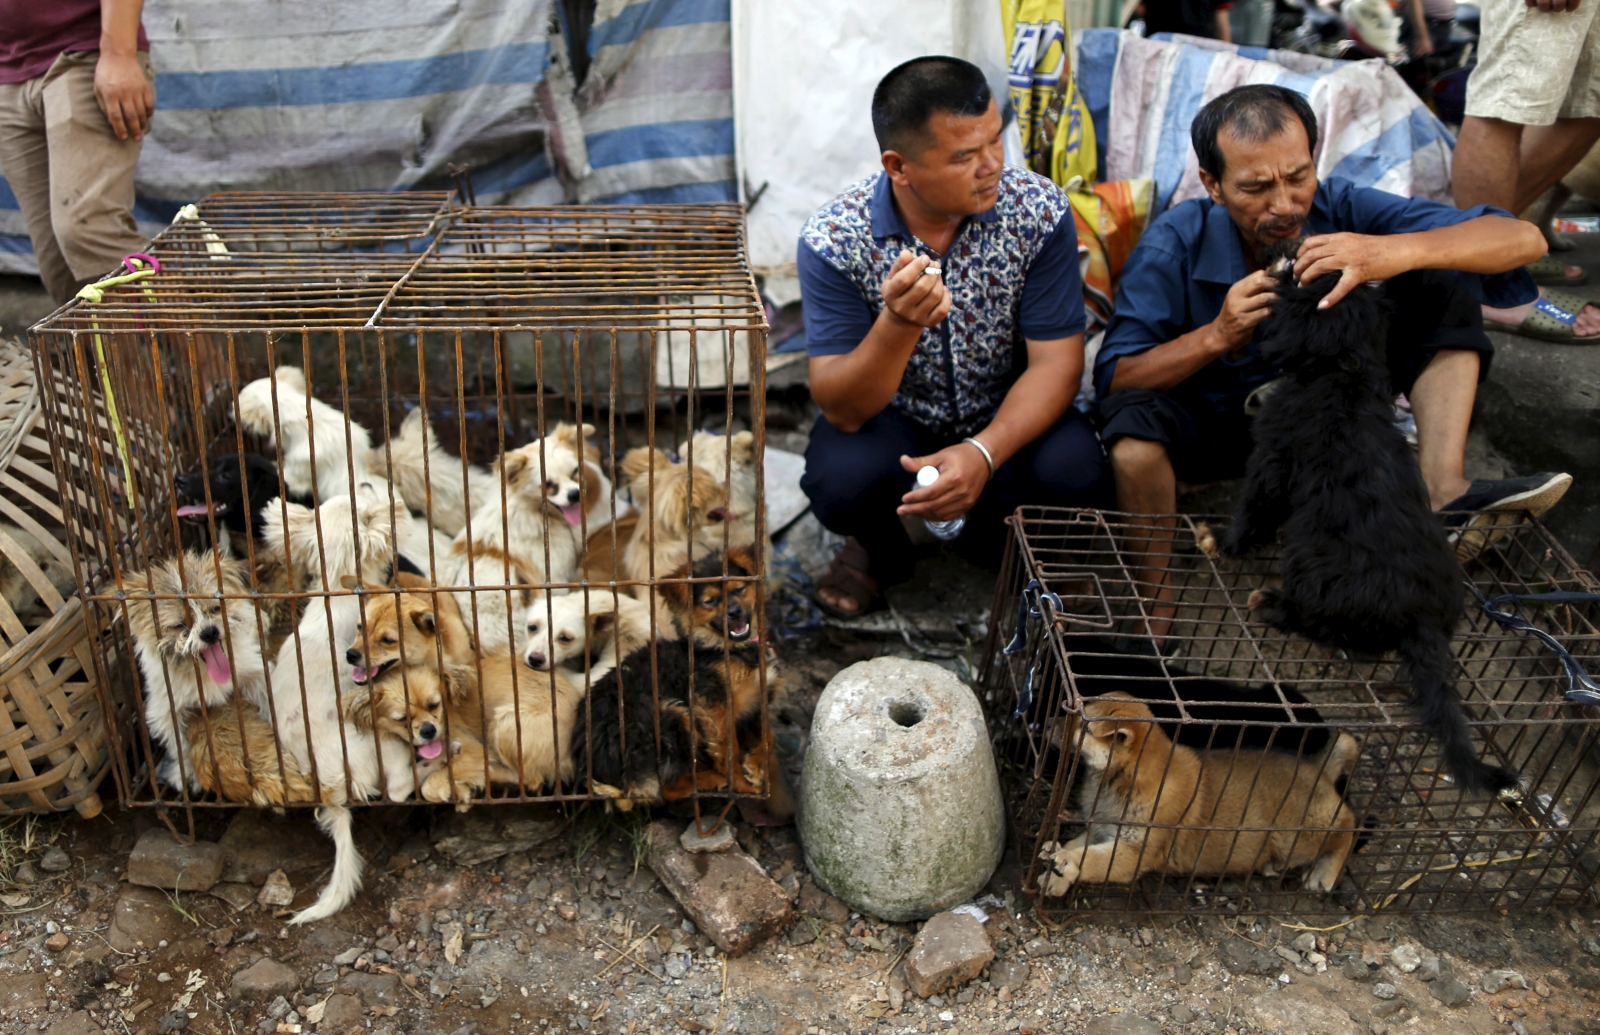 China's Dog Meat Festival 10 things you need to know [Graphic images]